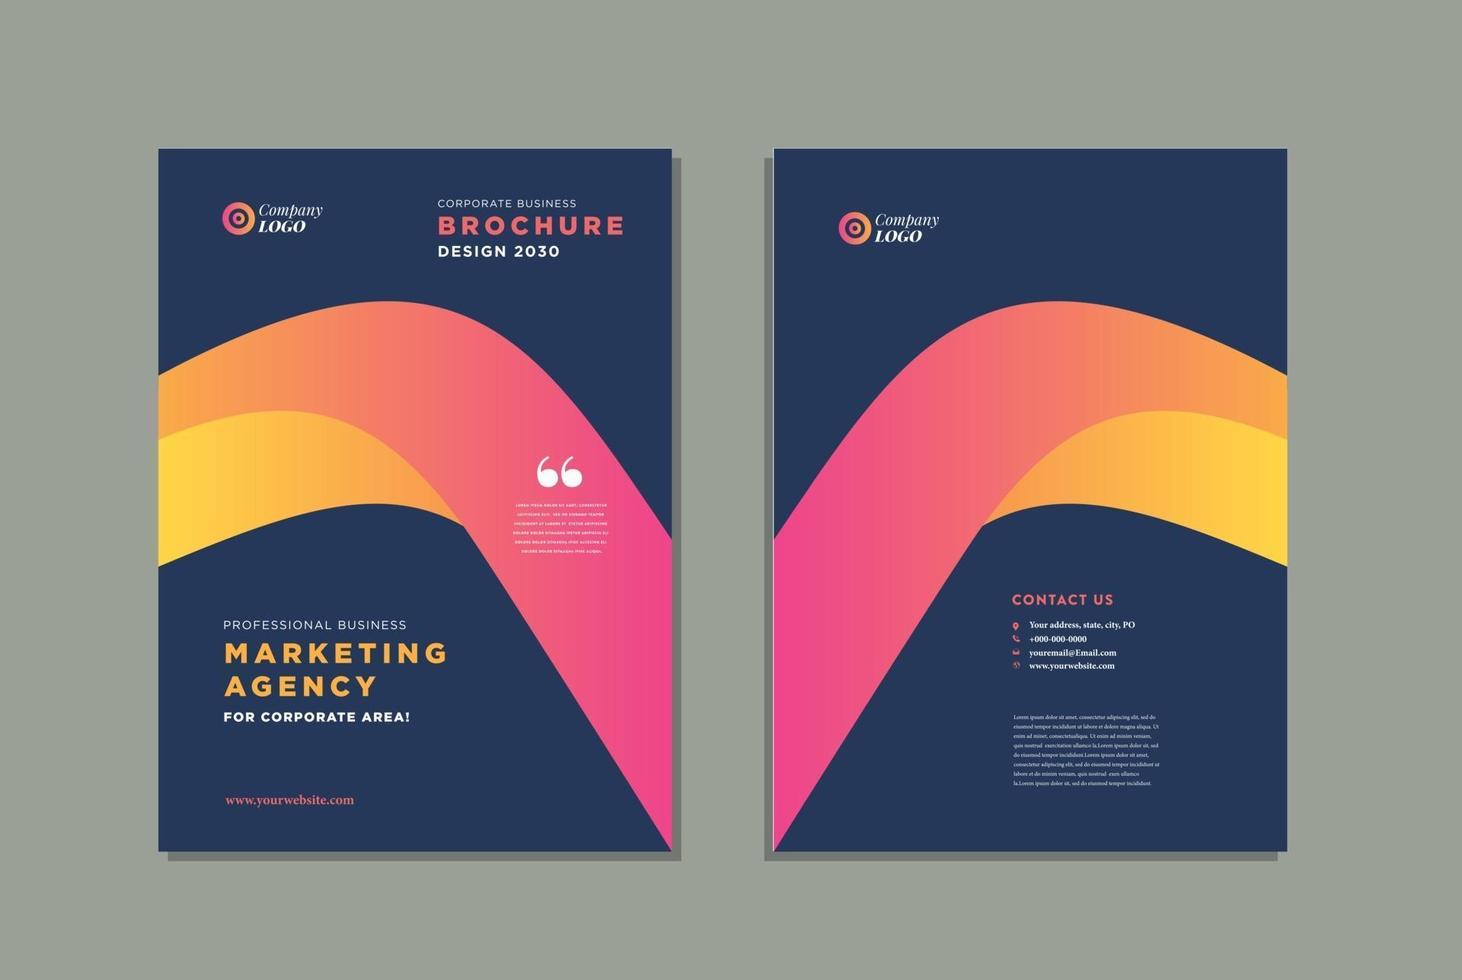 Business Brochure Cover Design or Annual Report and Company Profile Cover or Booklet and Catalog Cover vector